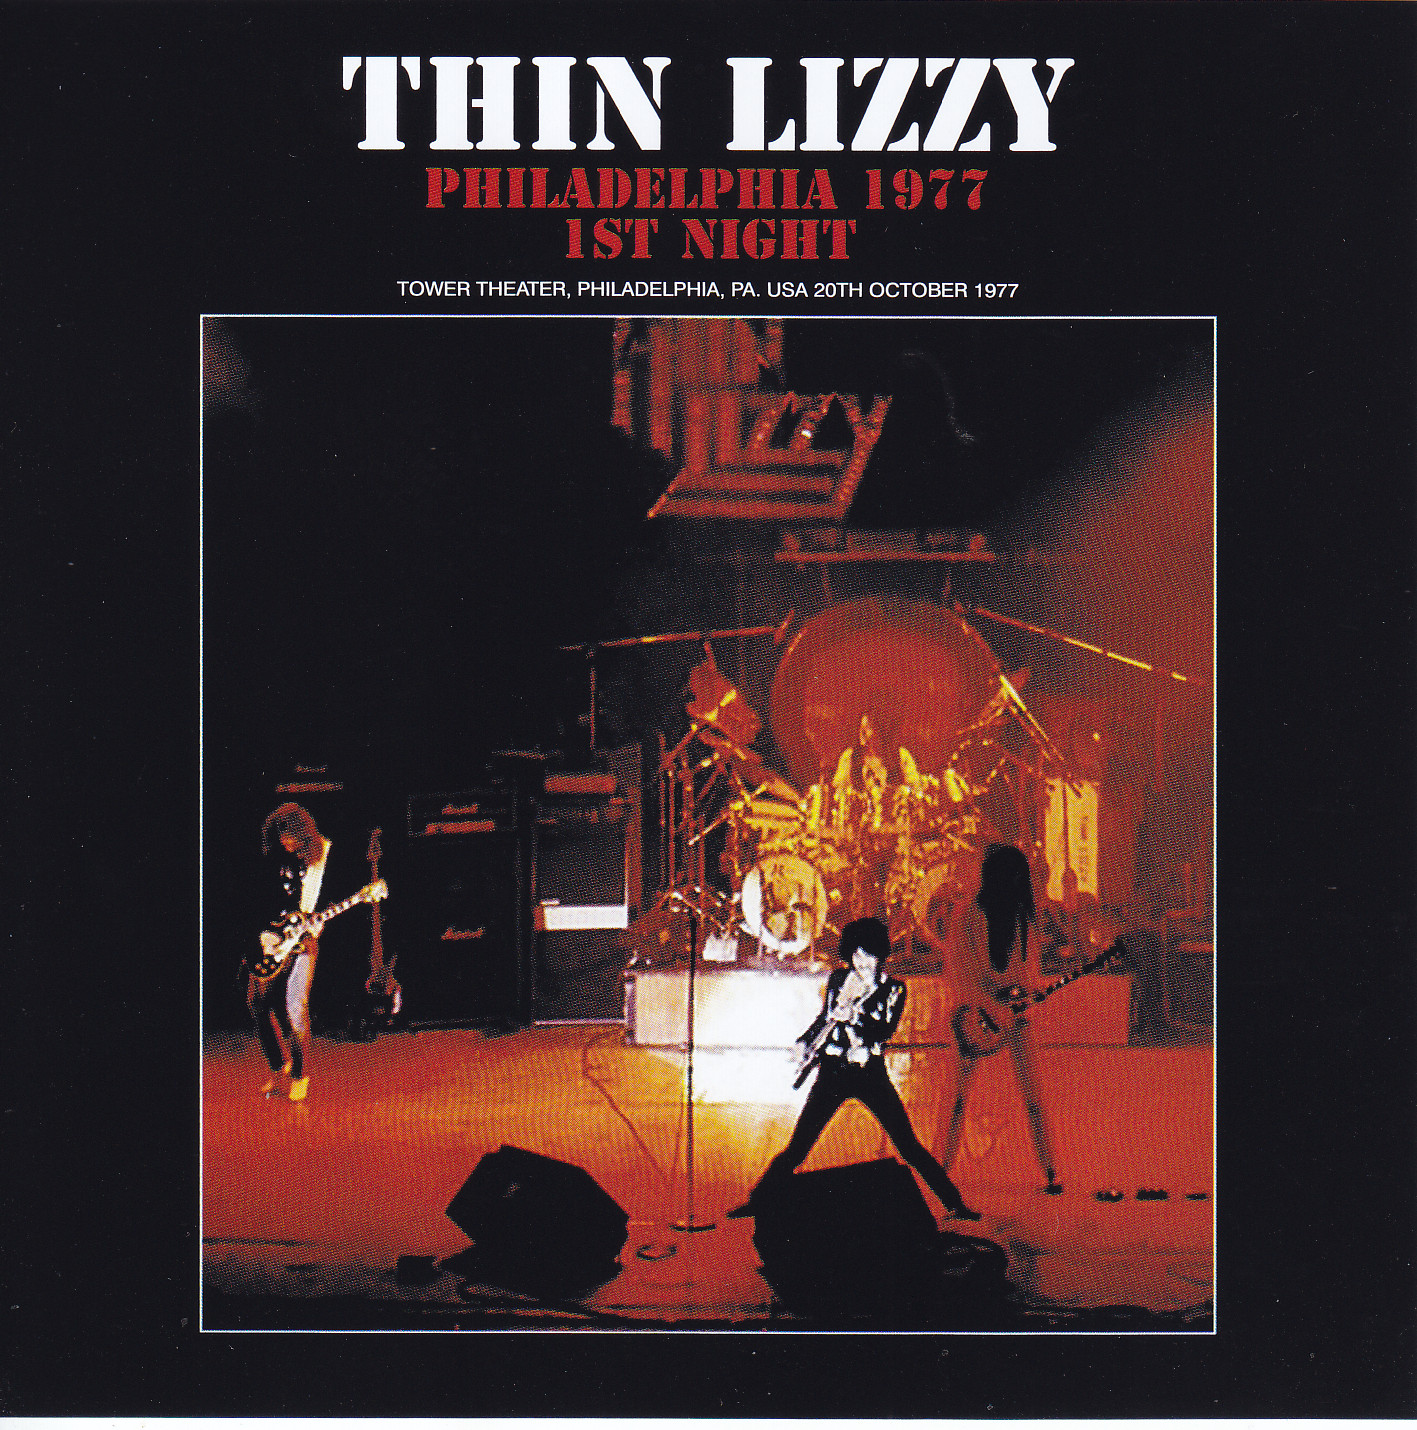 THIN LIZZY - PHILADEPLPHIA 1977, 1ST NIGHT - NUMBERED EDITION